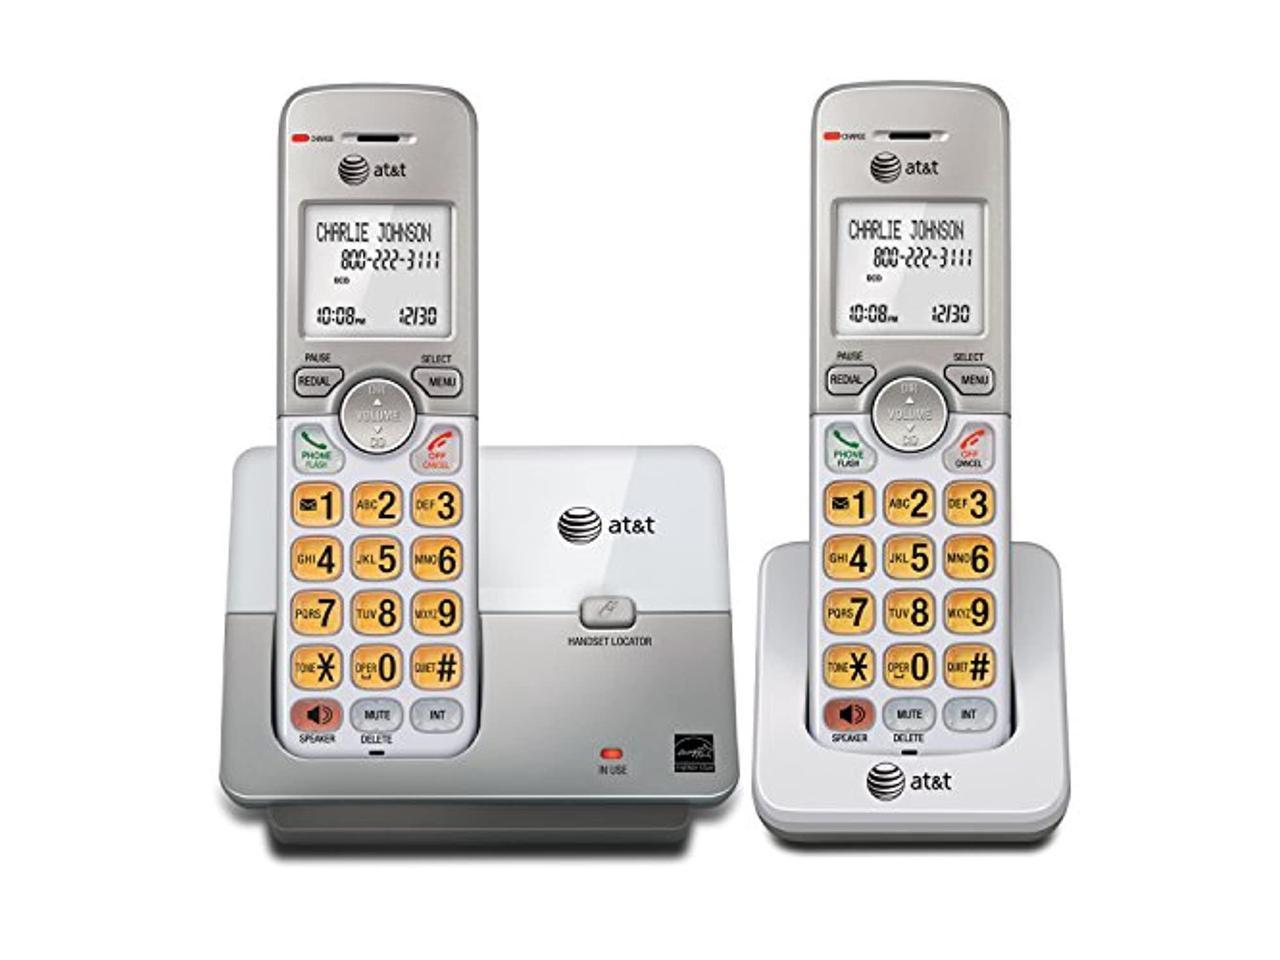 Dect 6.0 1-Handset 2-Line Landline Telephone Bundle with 3 Handsets and Dual Caller ID/Call Waiting TL88102 AT&T 